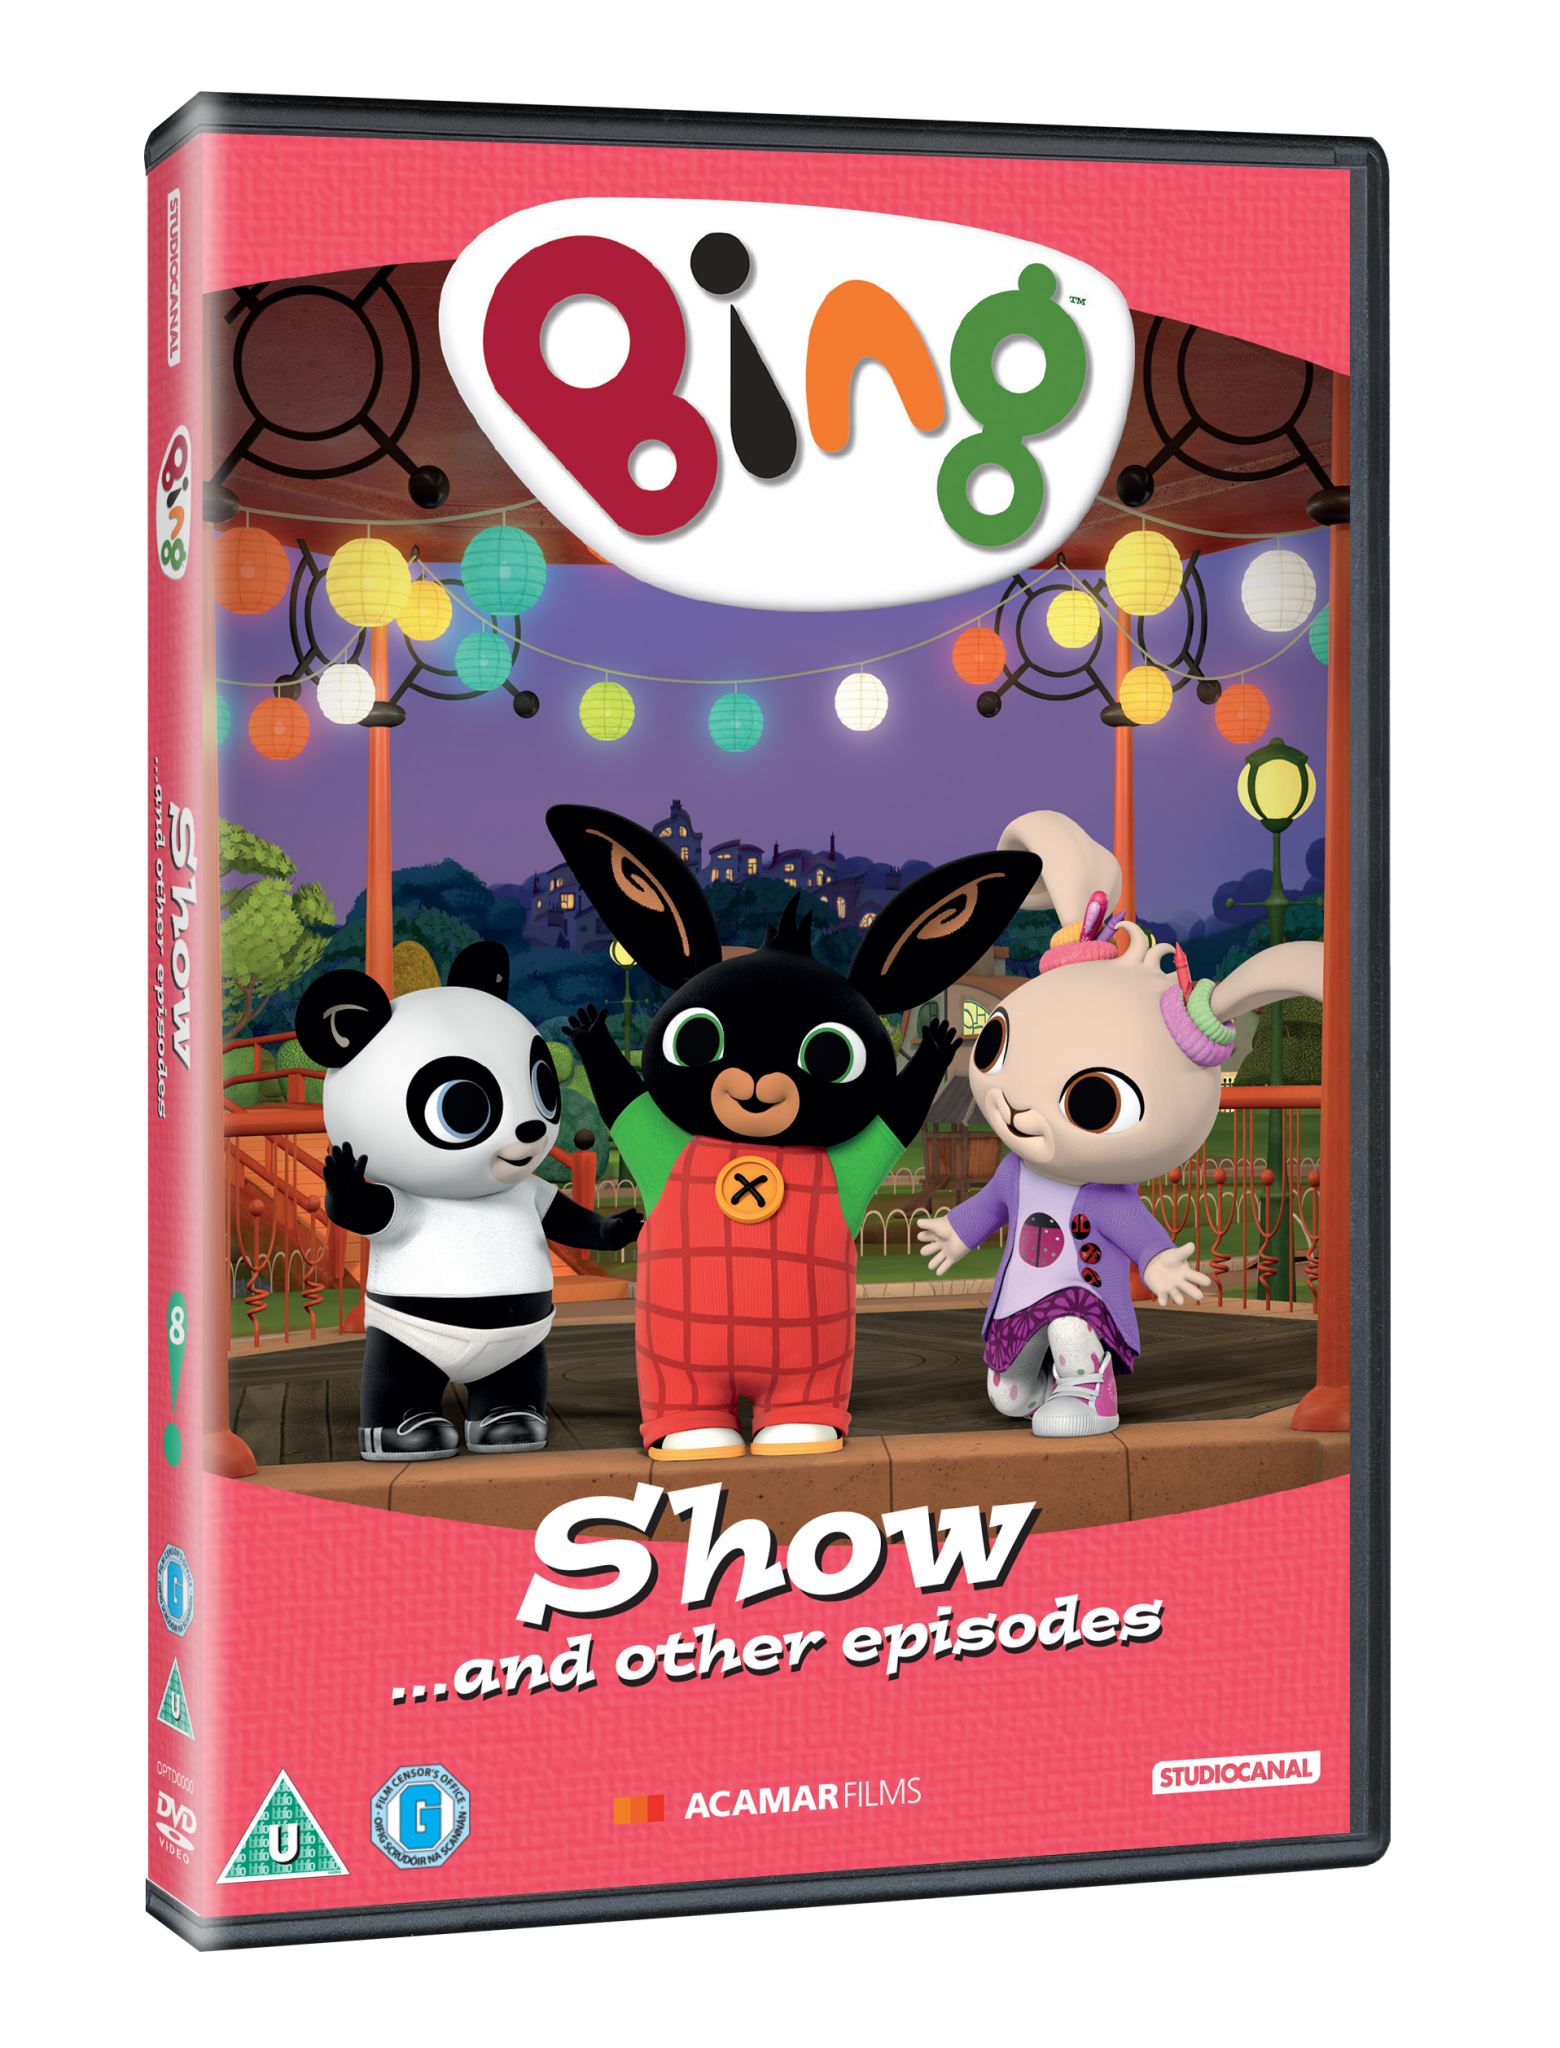 BING : The Hit CBeebies Show Comes to DVD